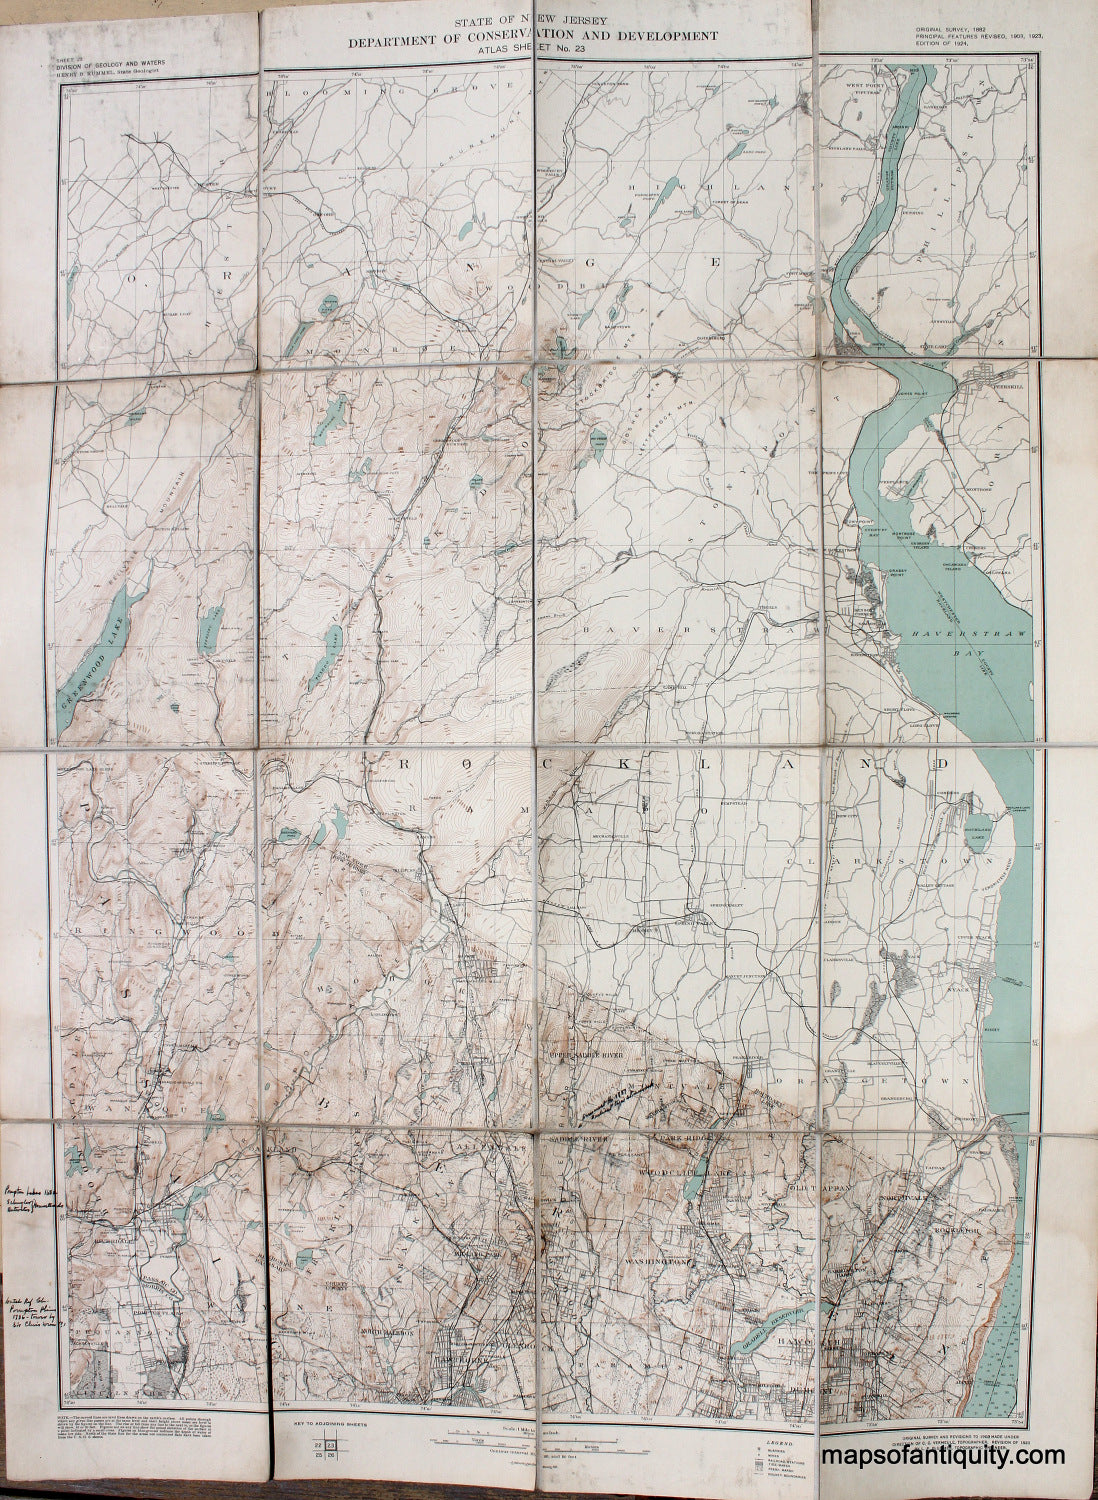 Antique-Folding-Topographical-Map-Printed-Color-Hawthorne-New-Jersey-area-Atlas-Sheet-No.-23-New-Jersey-Folding-Maps-1924-State-of-New-Jersey-Department-of-Conservation-and-Development-Maps-Of-Antiquity